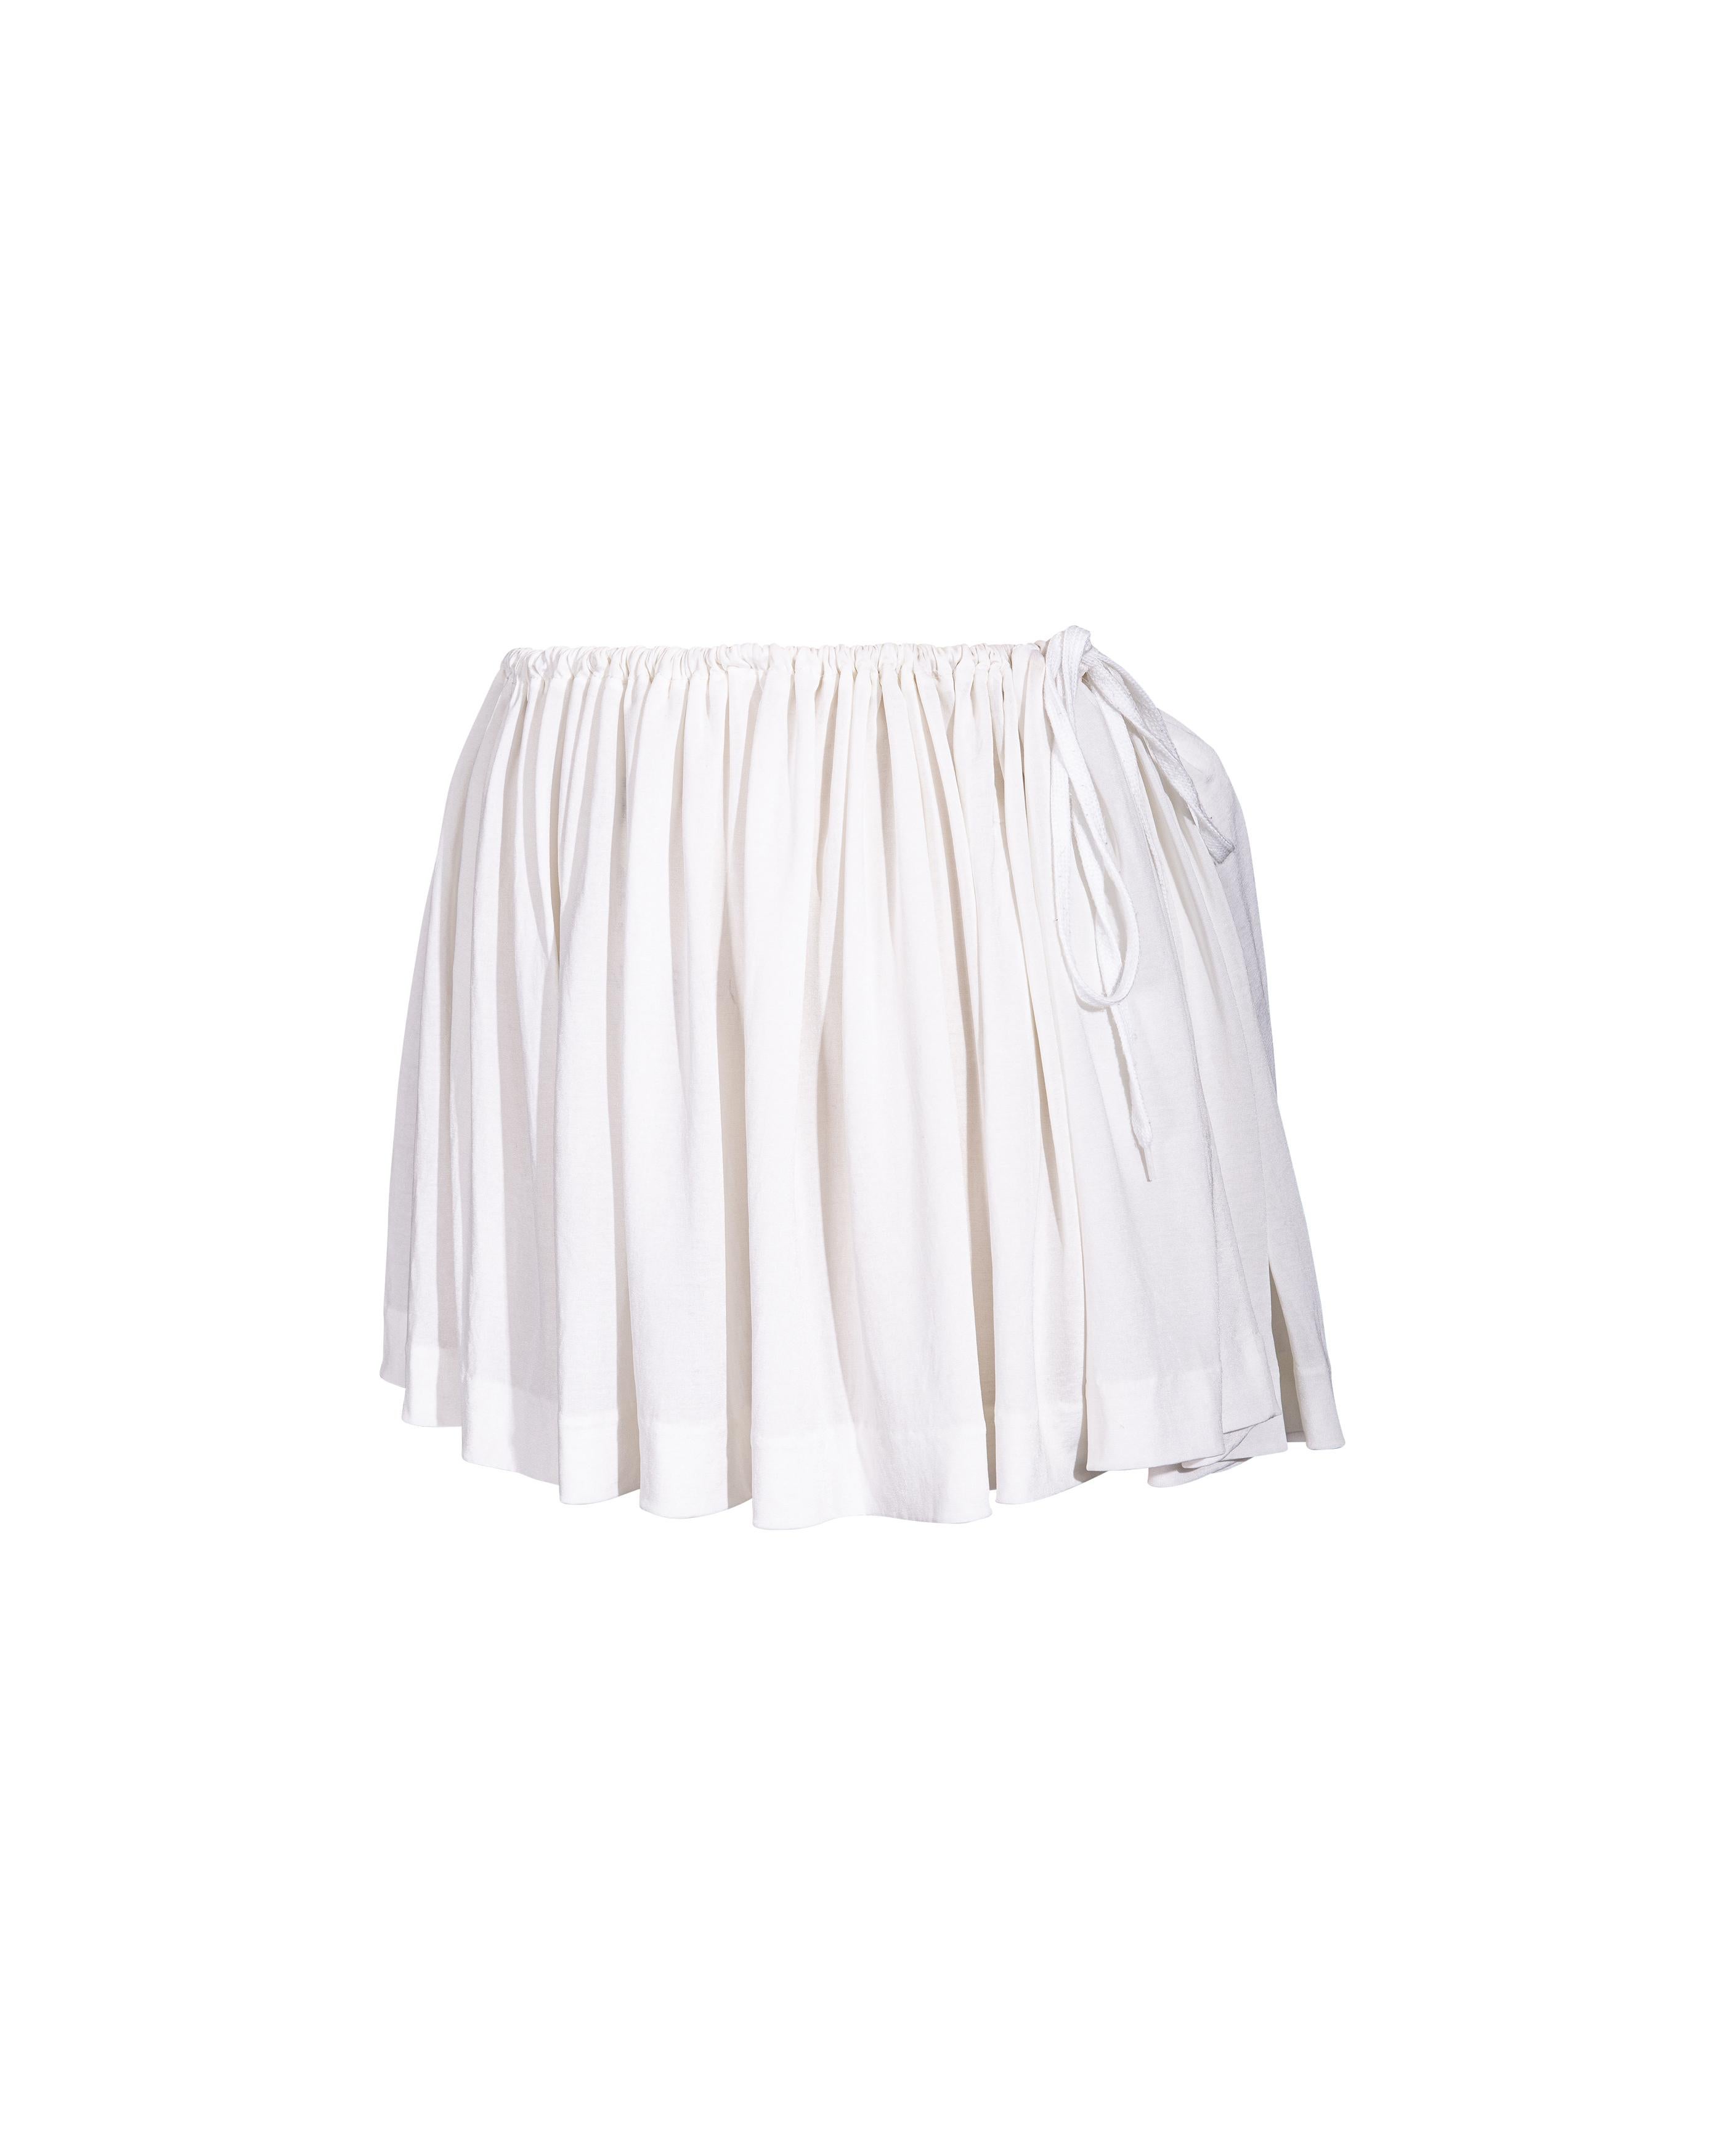 S/S 1988 Vivienne Westwood White Mini Skirt with Removable Bustle In Excellent Condition For Sale In North Hollywood, CA